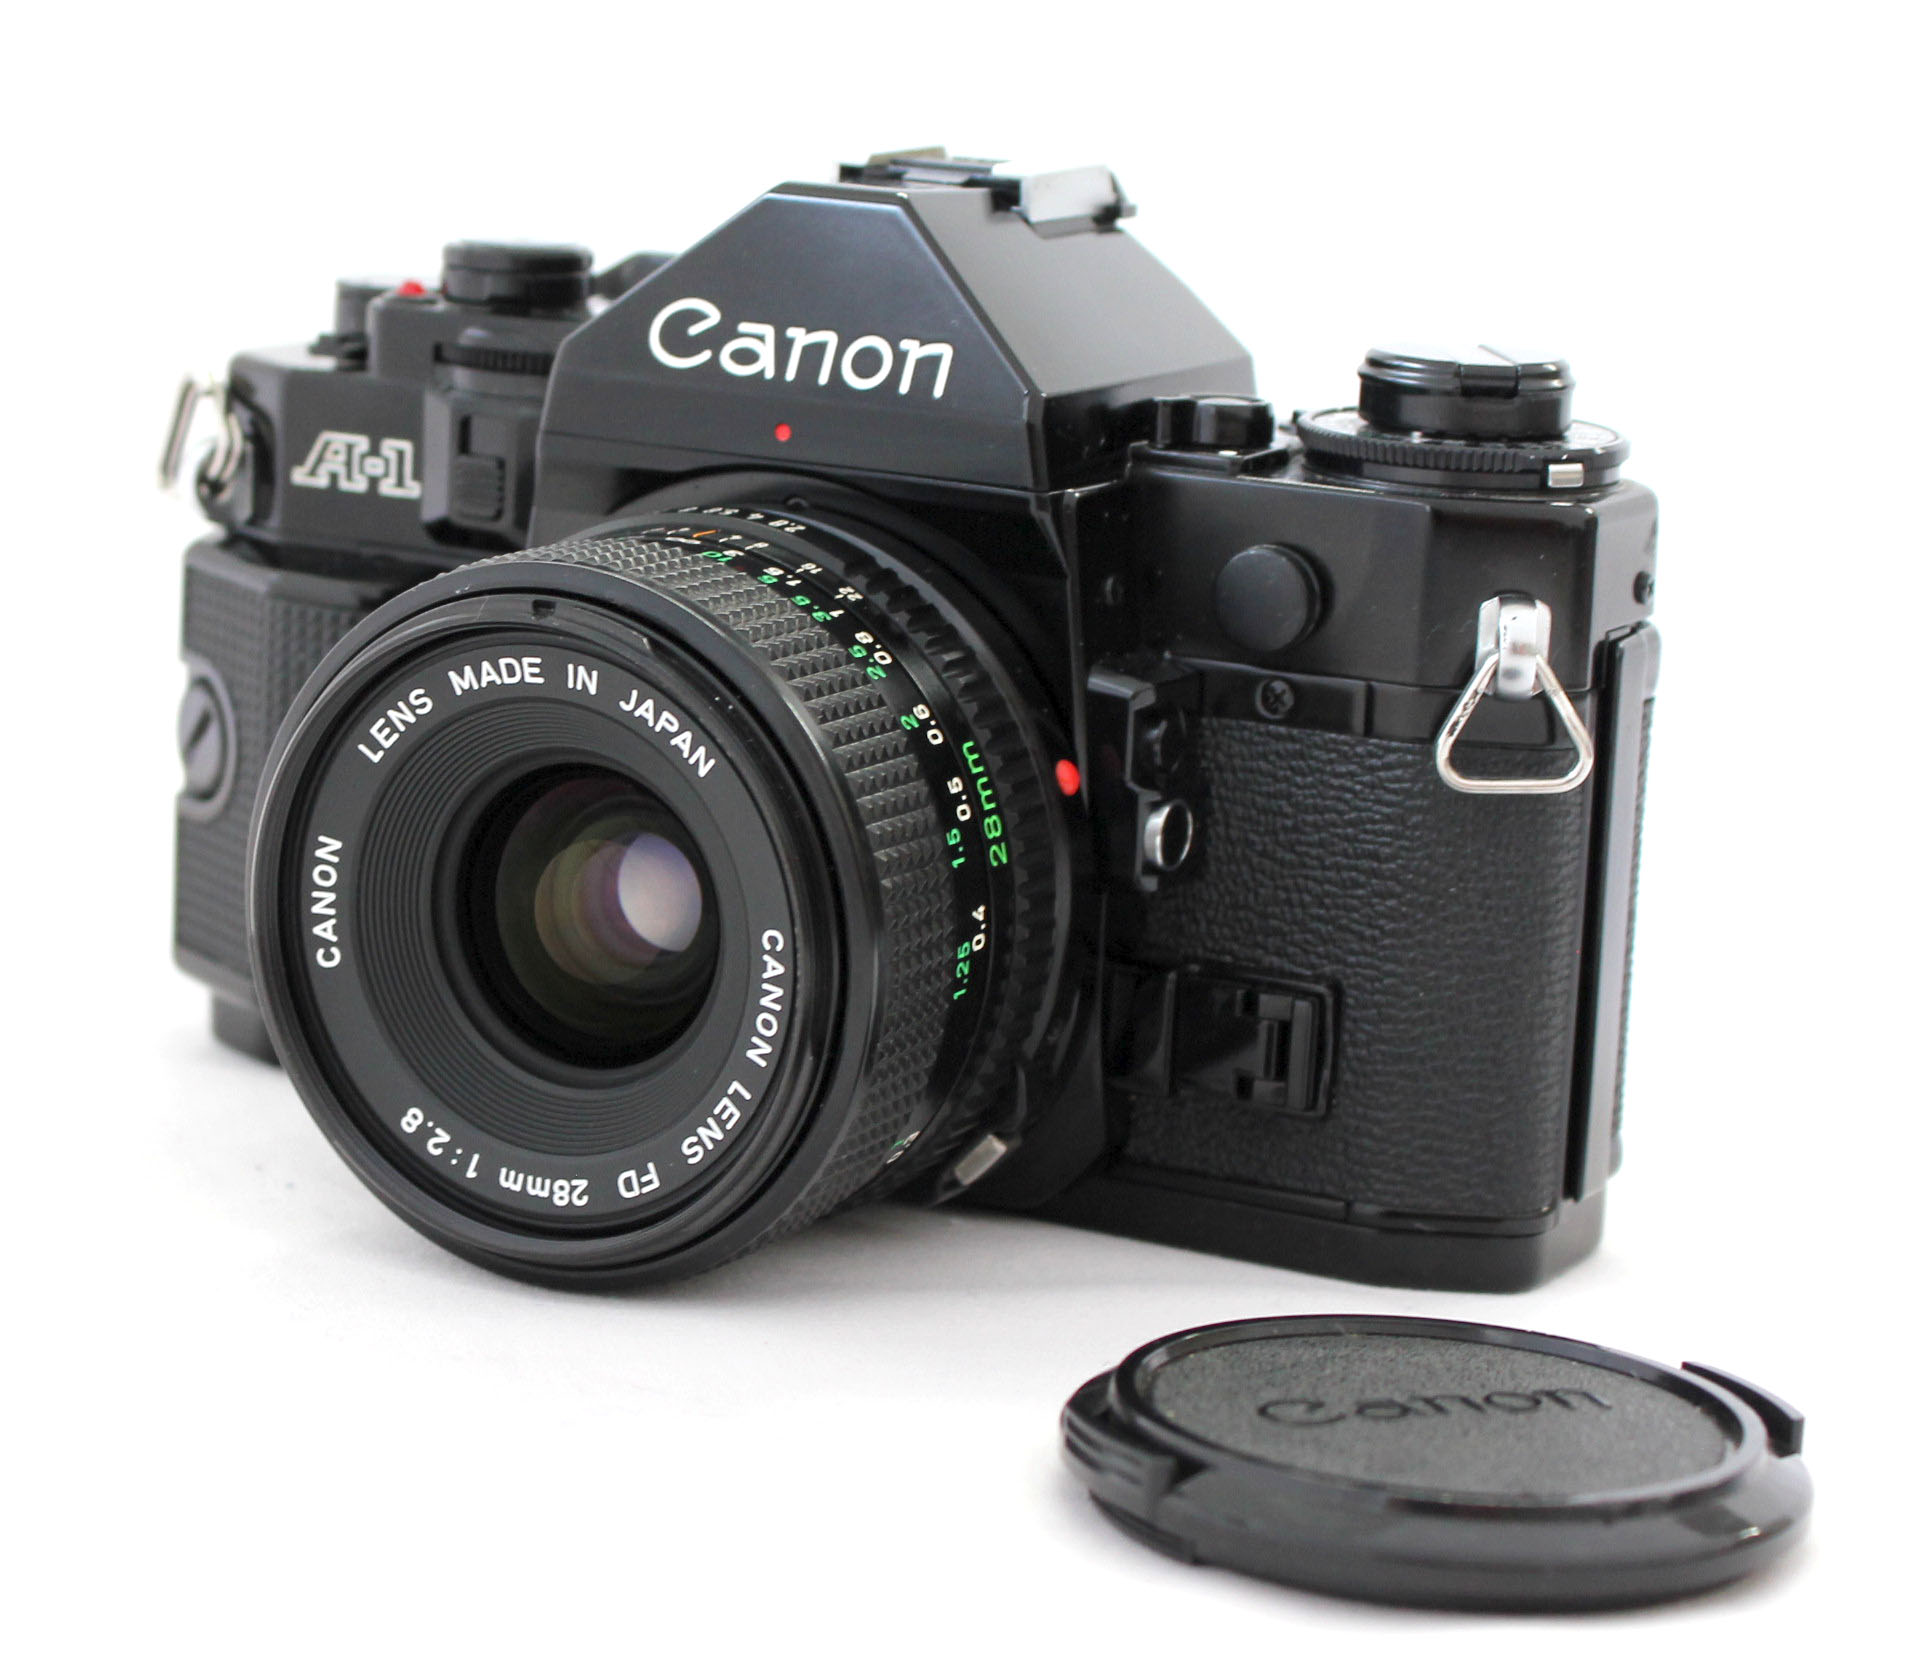 Japan Used Camera Shop | Canon A-1 35mm SLR Film Camera with New FD 28mm F/2.8 Lens from Japan